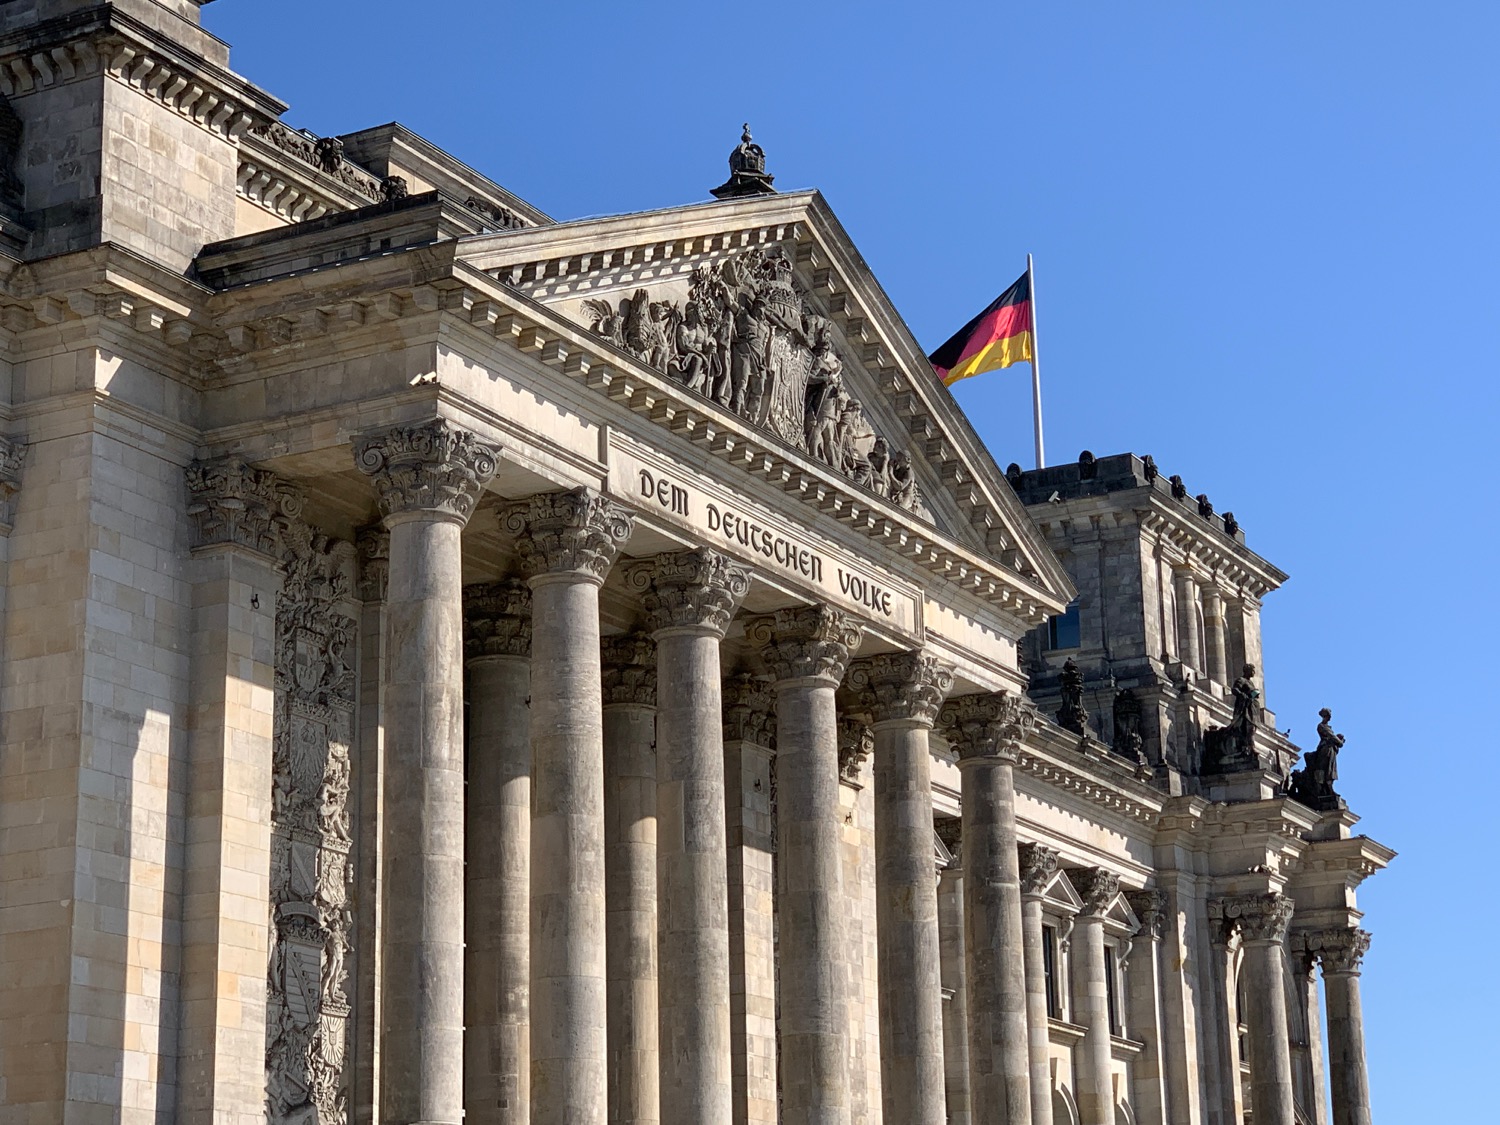 Reichstag building with columns and a flag on top